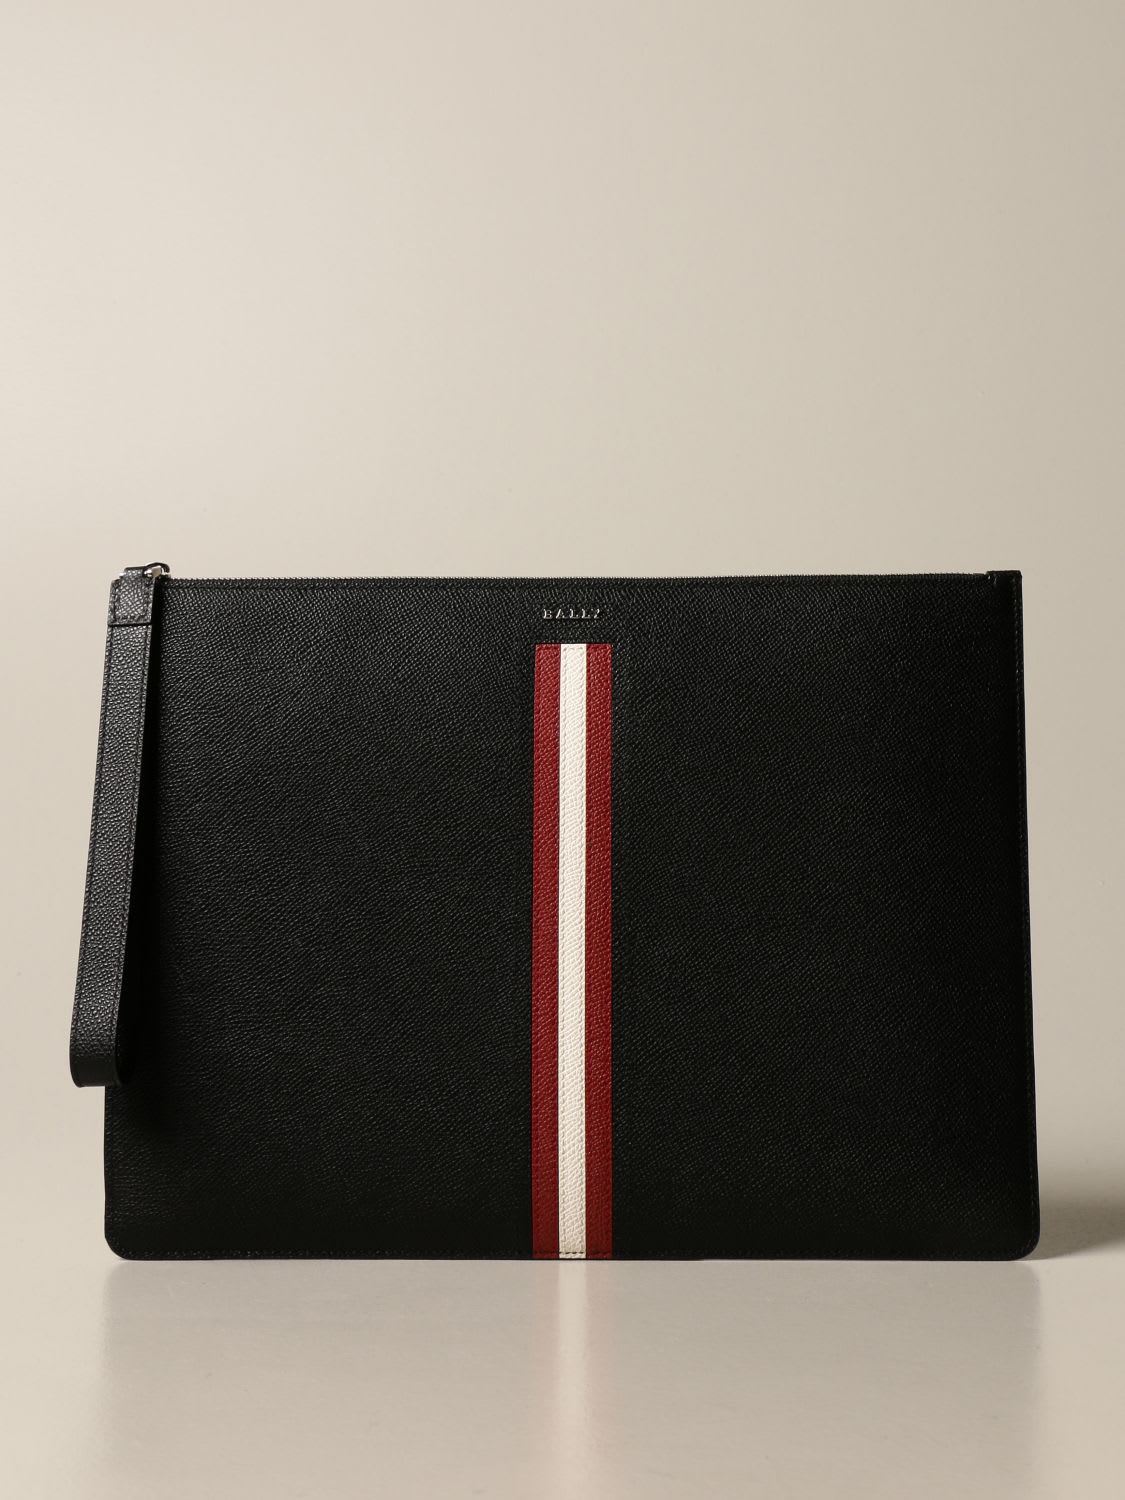 Bally Briefcase Thalden. lt Bally Clutch Bag In Leather With Trainspotting Band